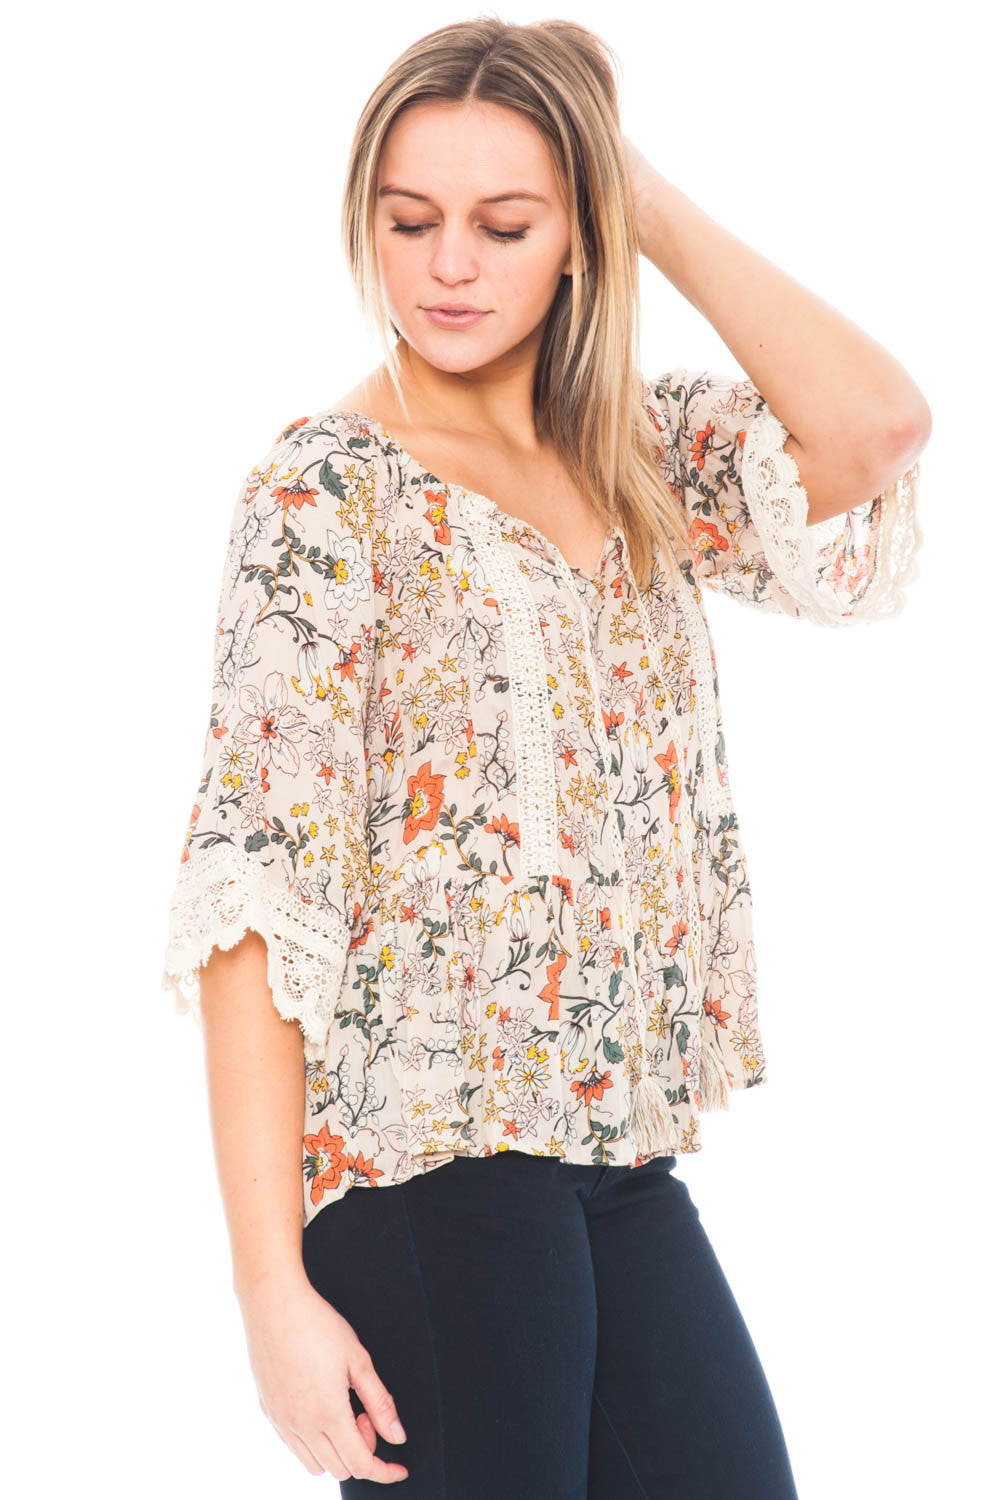 Blouse - Floral Peasant Top with a Bell Sleeve by Democracy